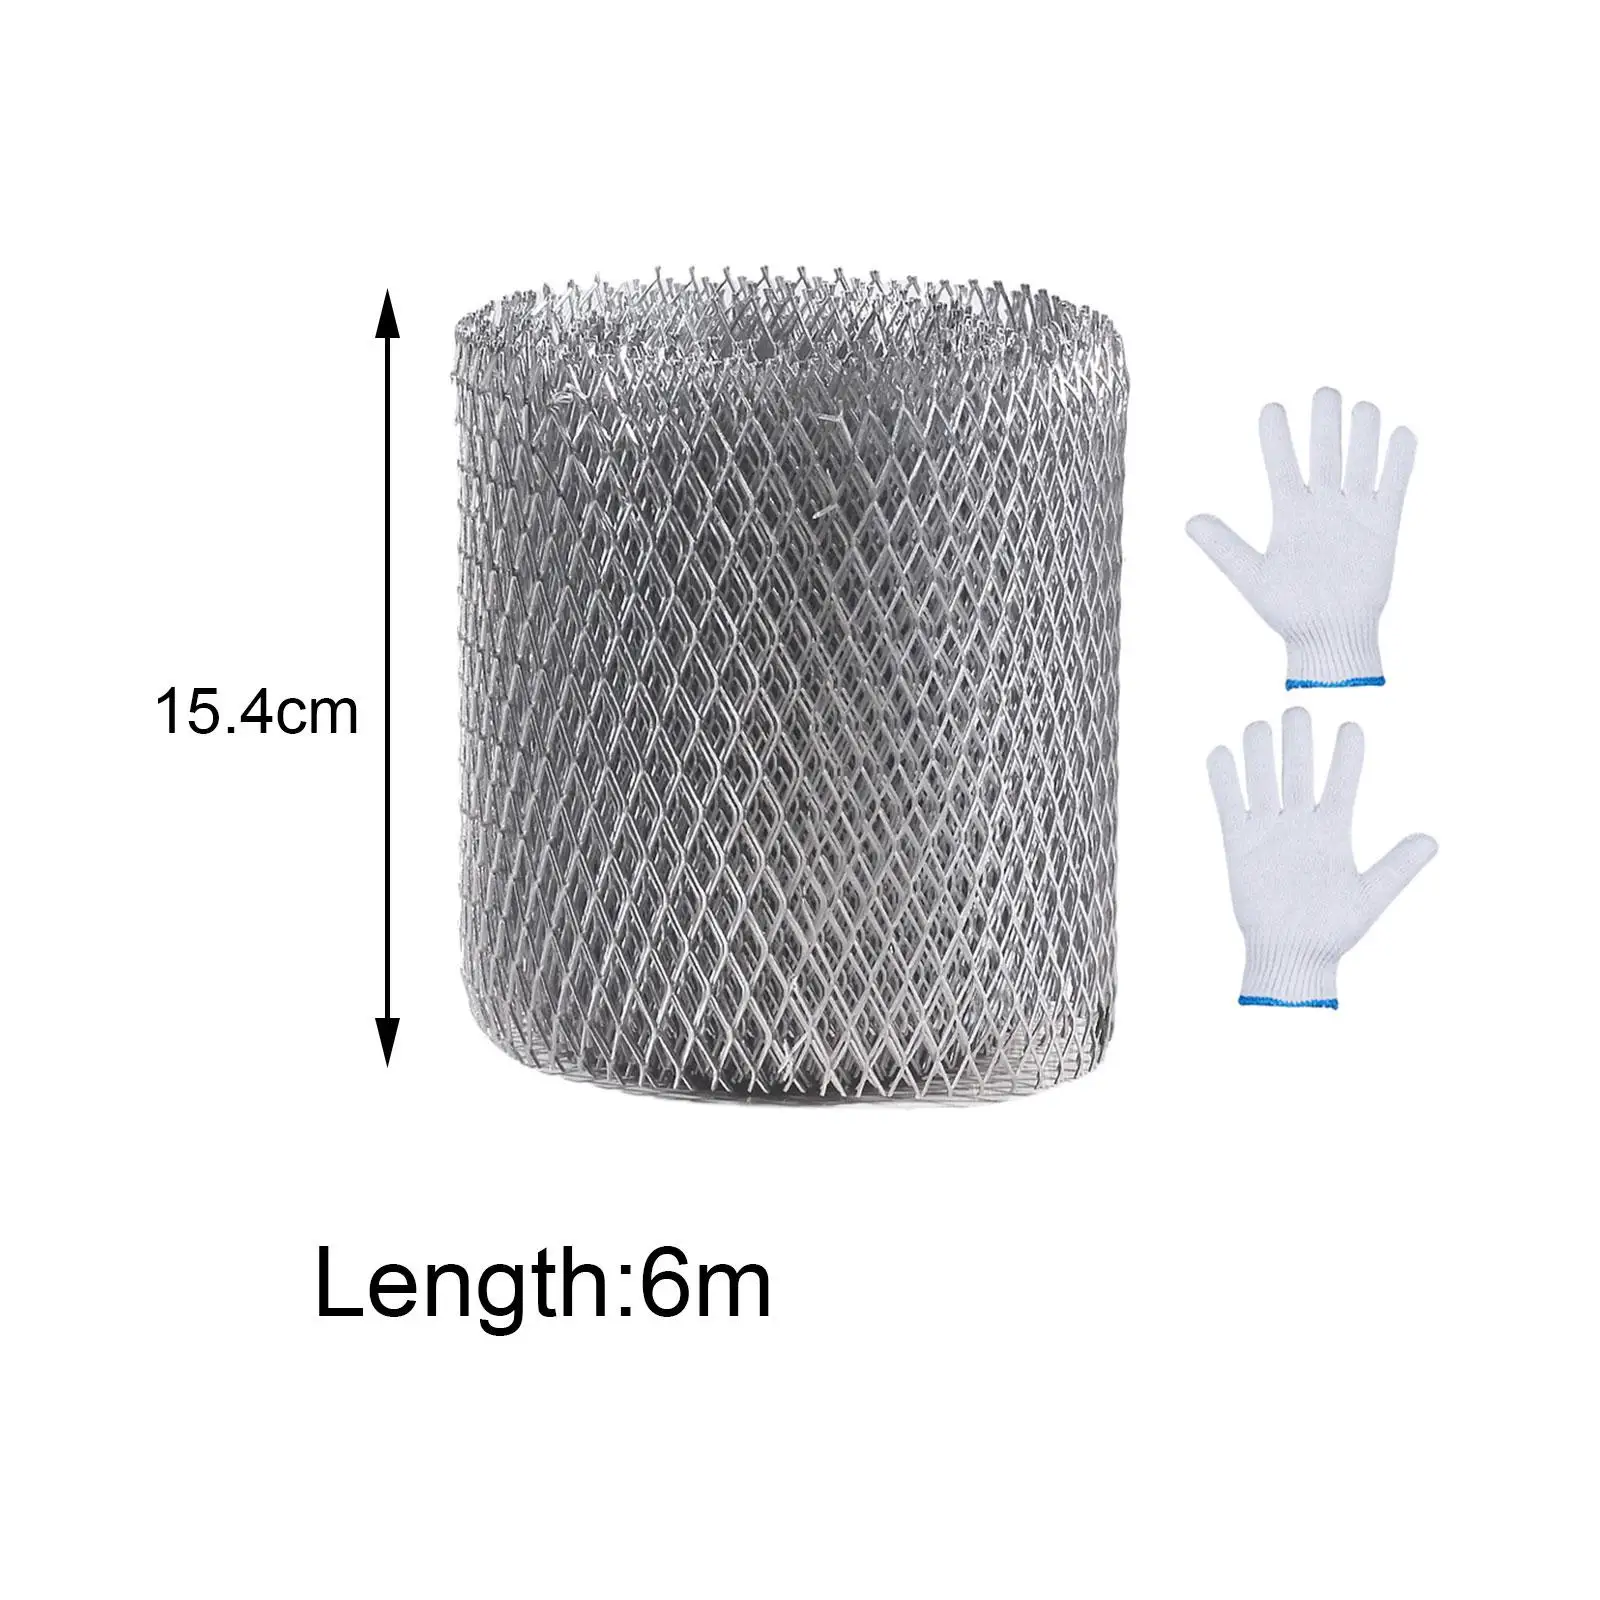 Gutter Guard Mesh Garbage Prevention Leaf Prevention Stable Easy Installation Multipurpose for Downspout Yard Accessories